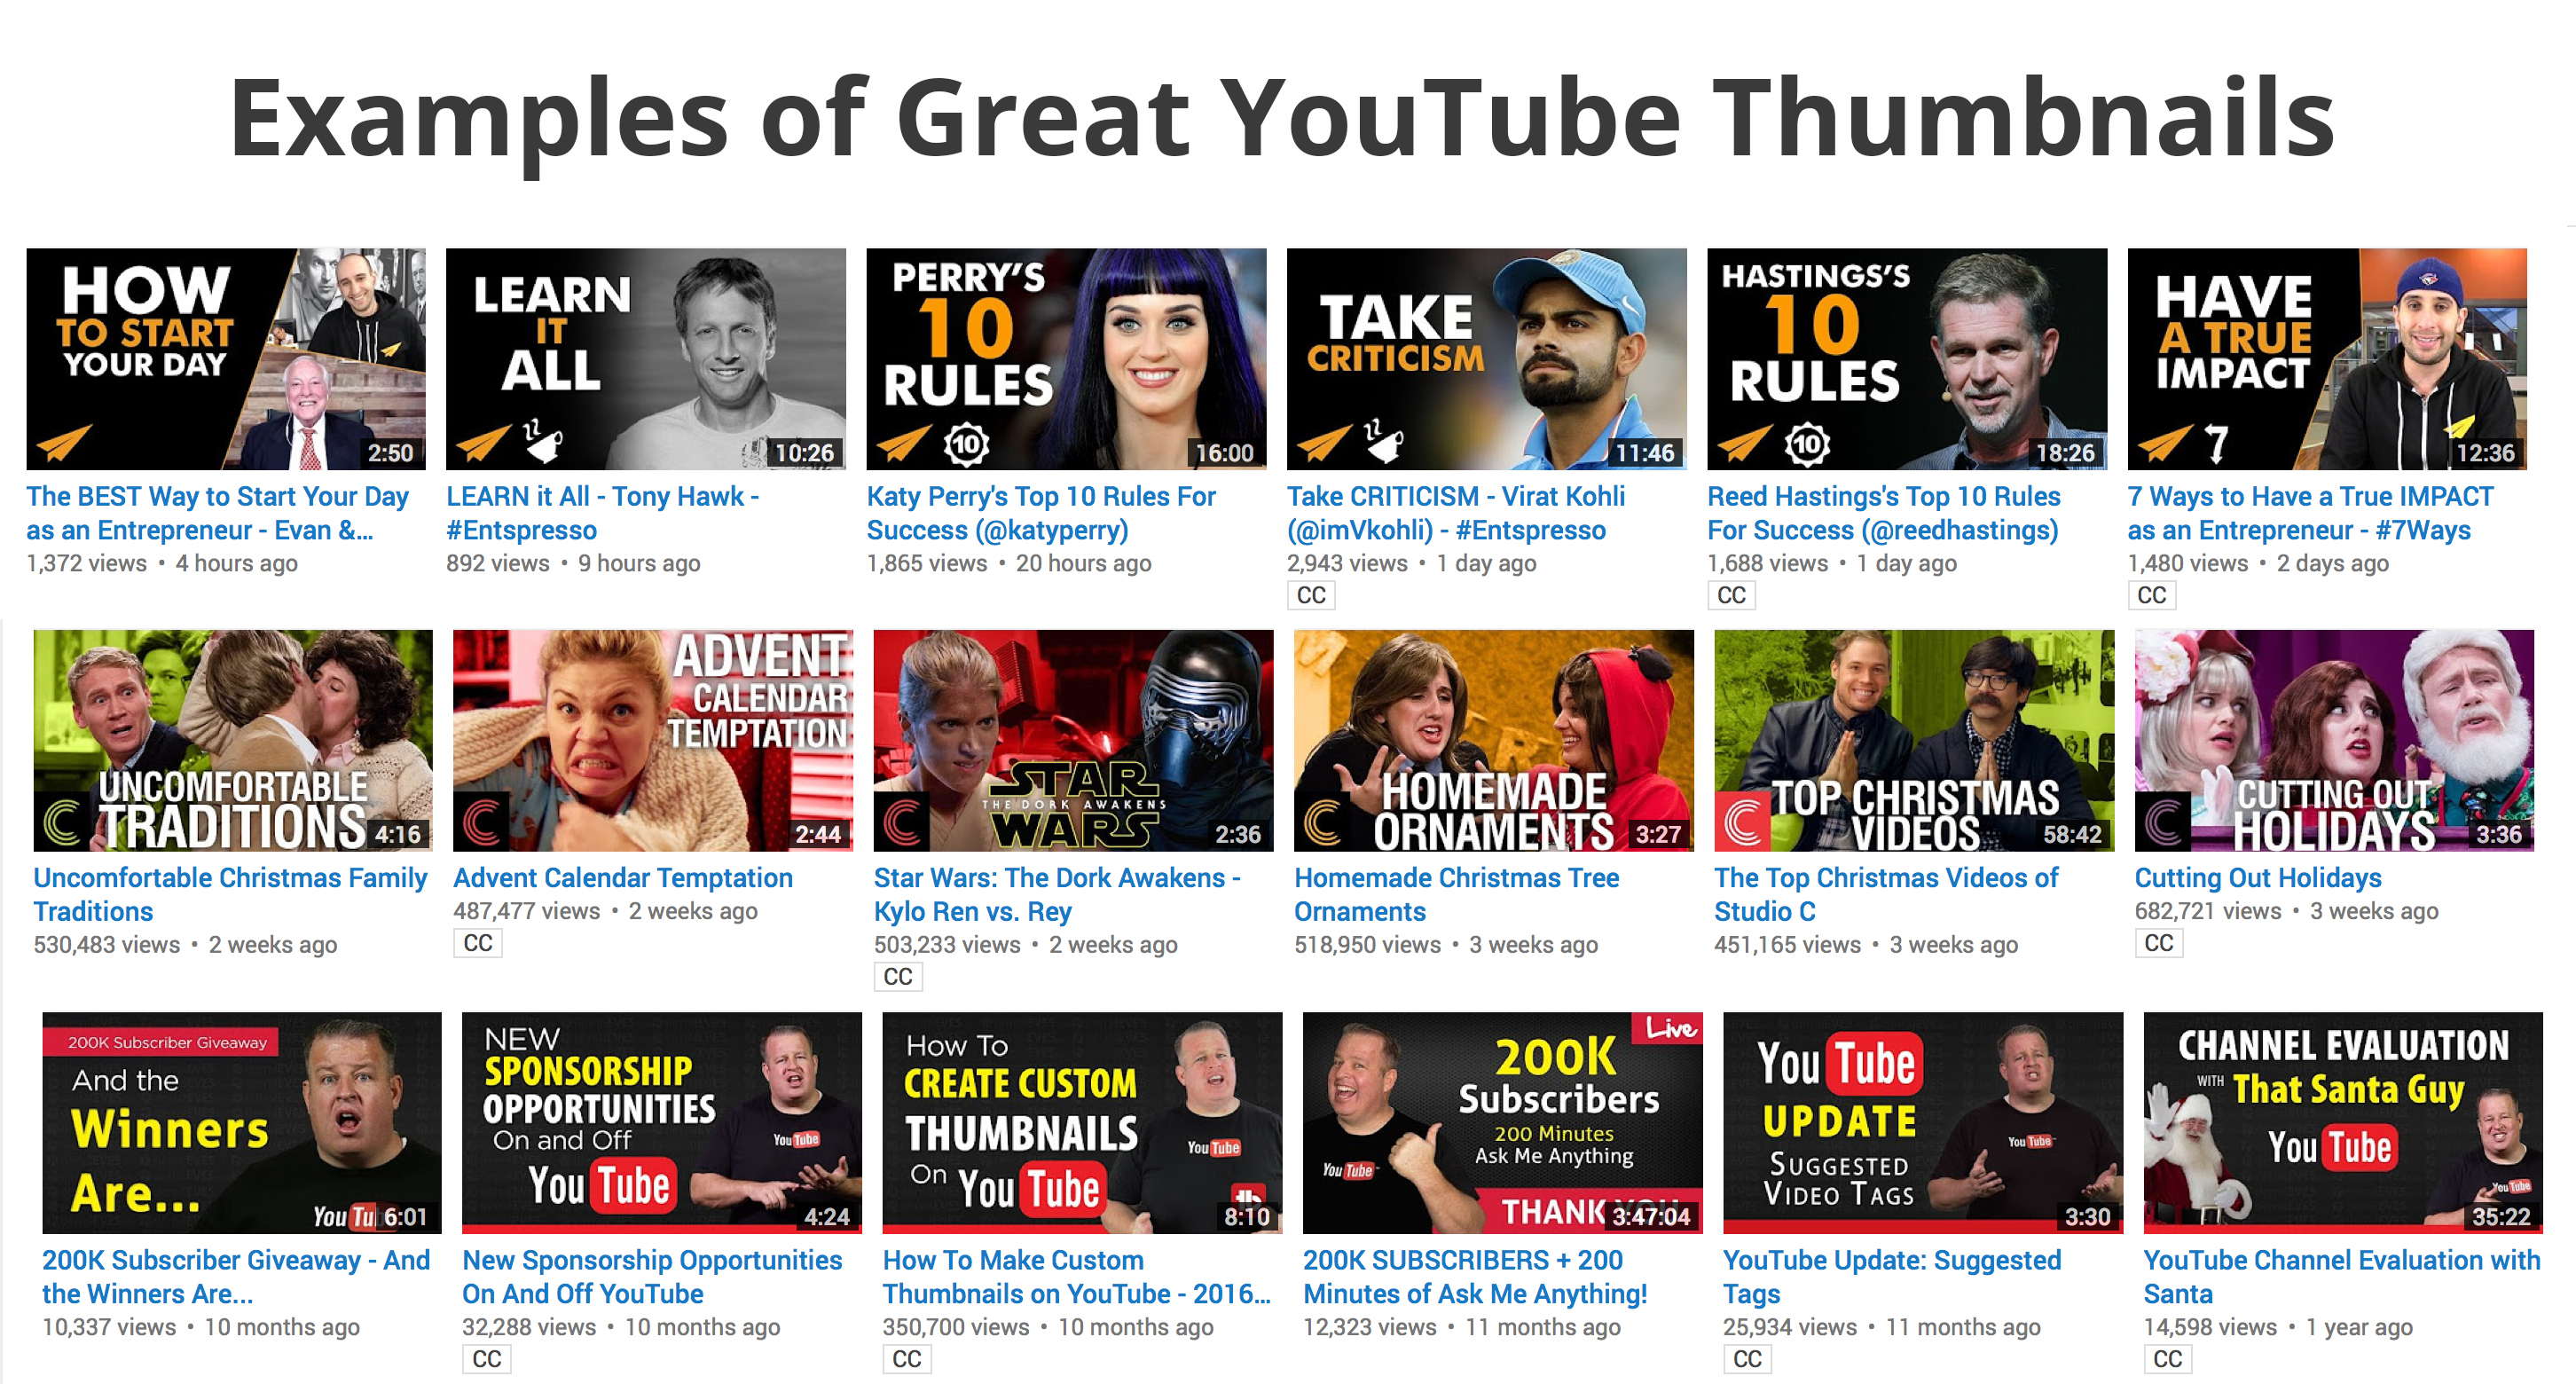 Examples of Great YouTube Thumbnails